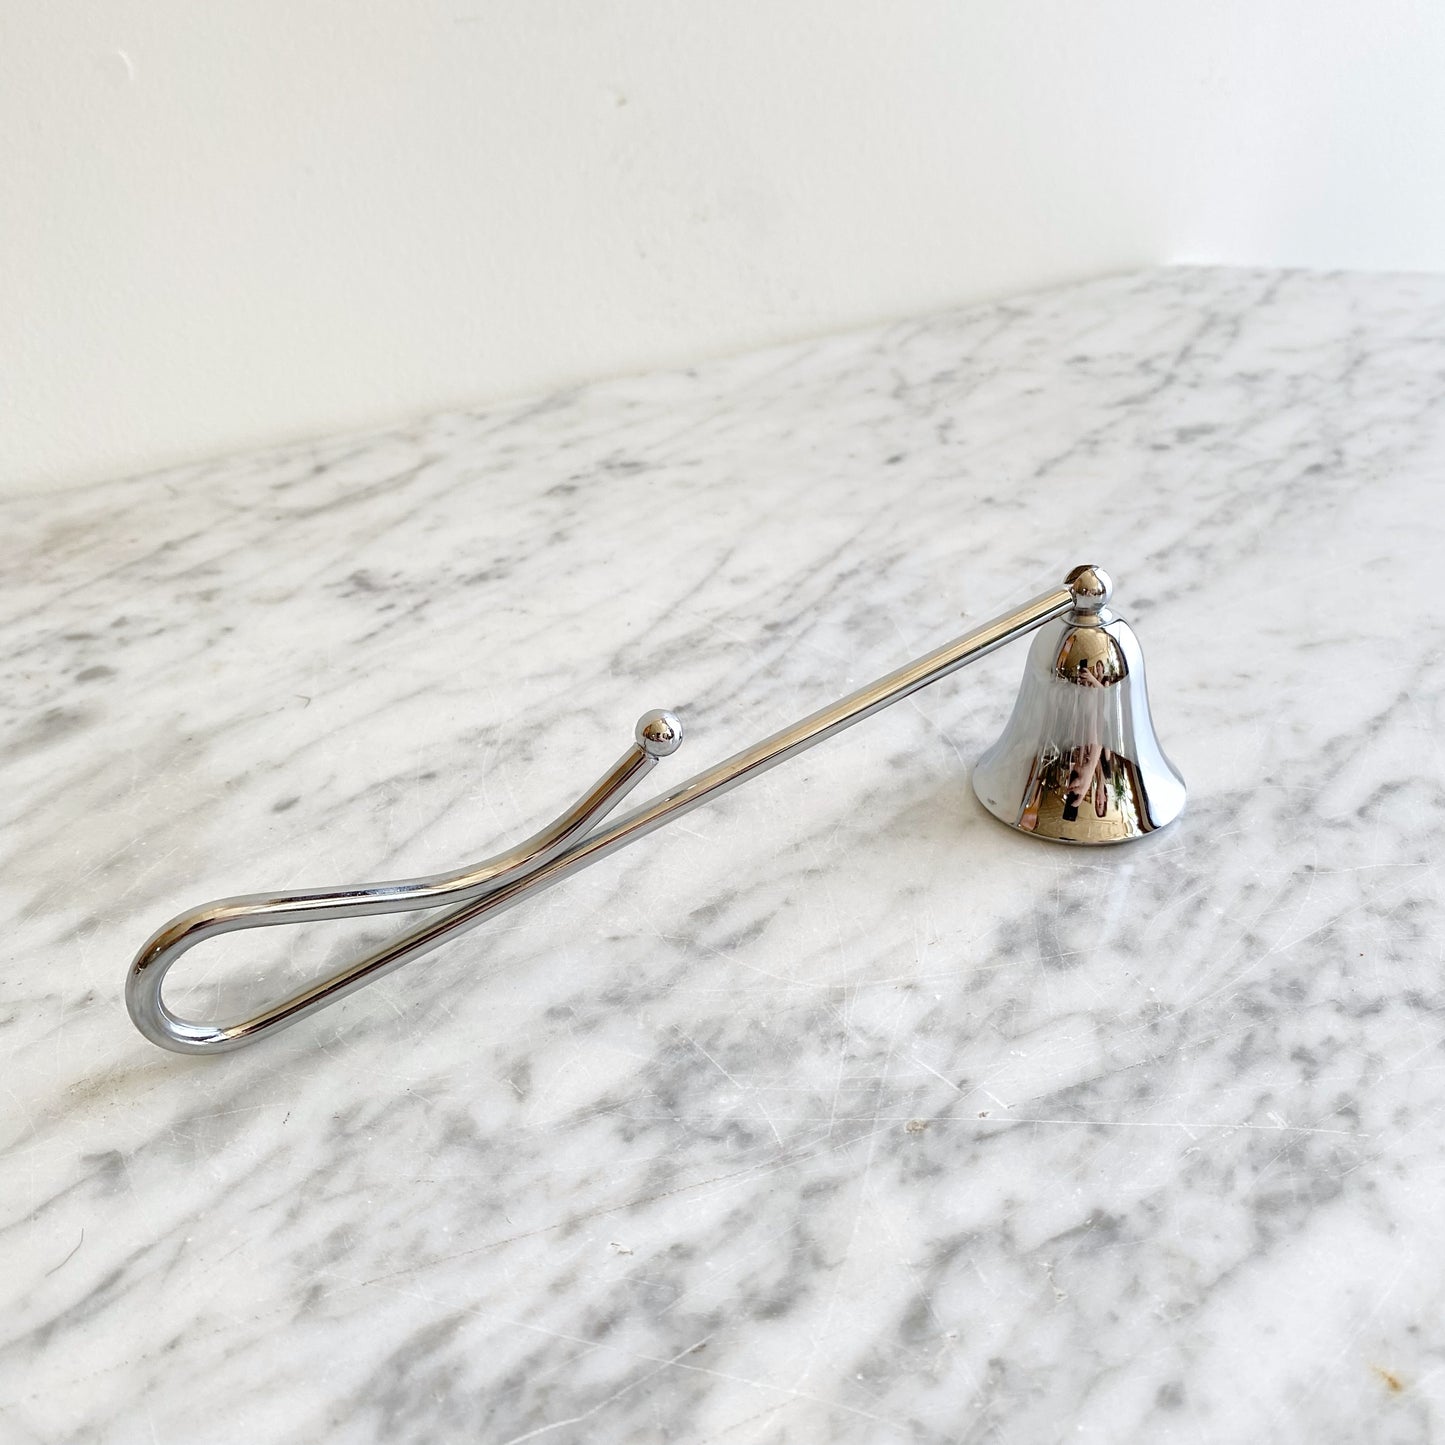 Found Vintage Silver Candle Snuffer